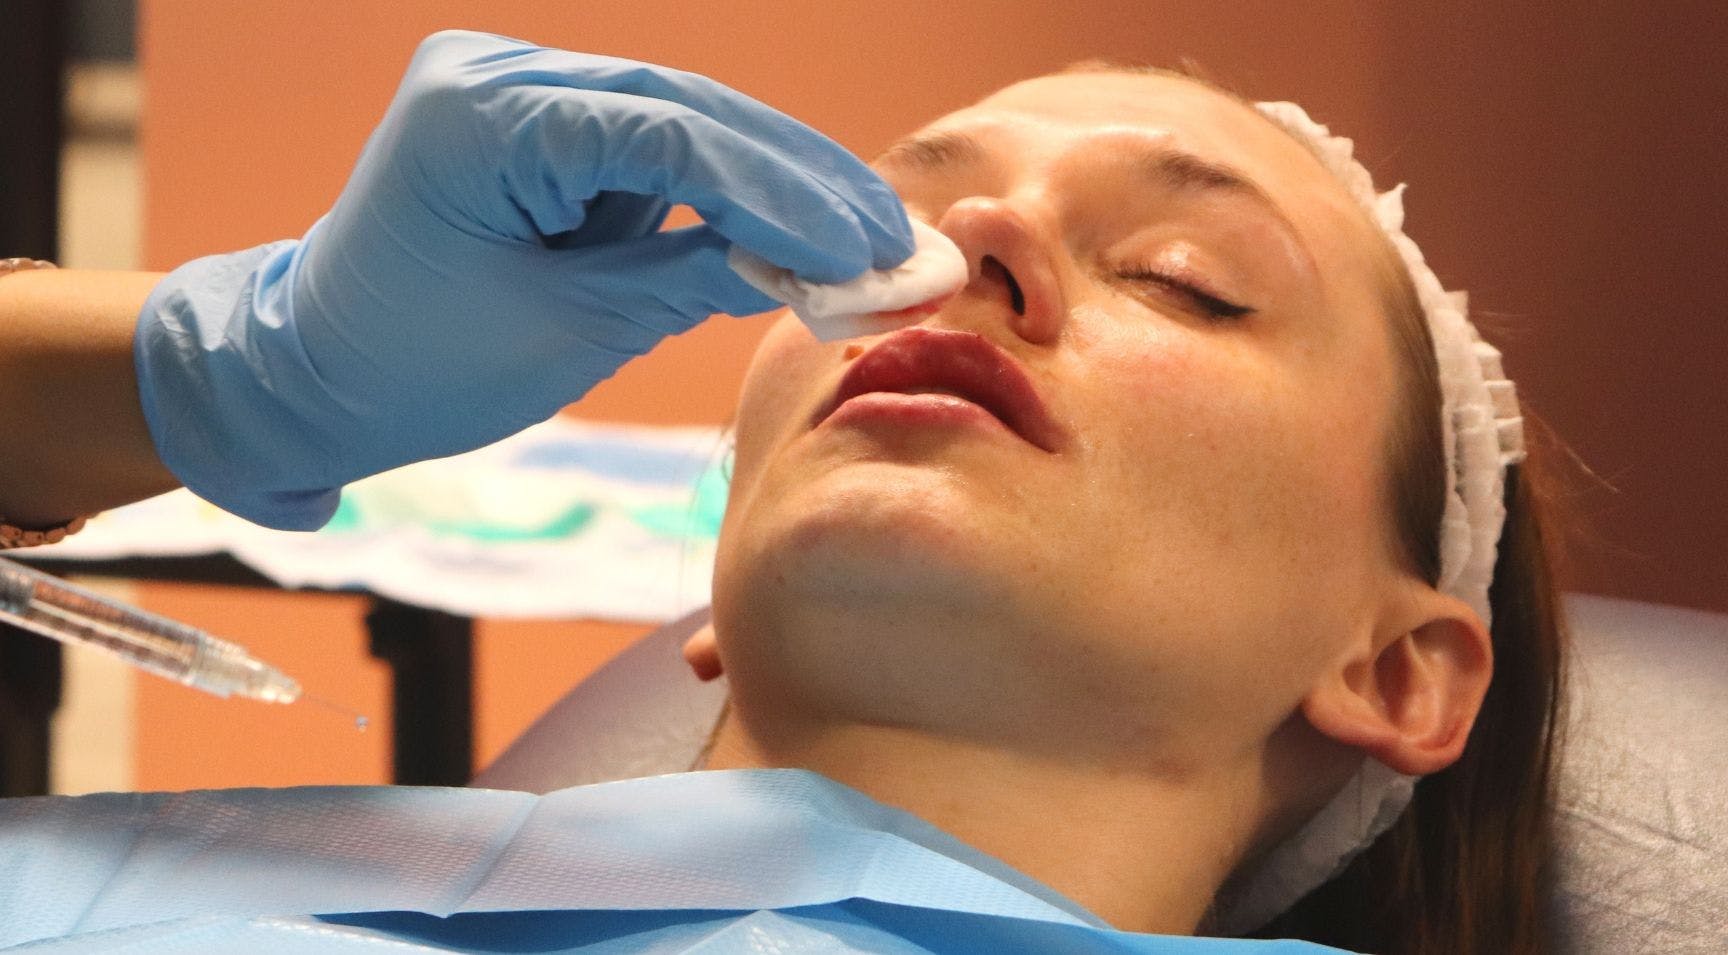 Revanesse® Lip Filler Training at Harley Academy